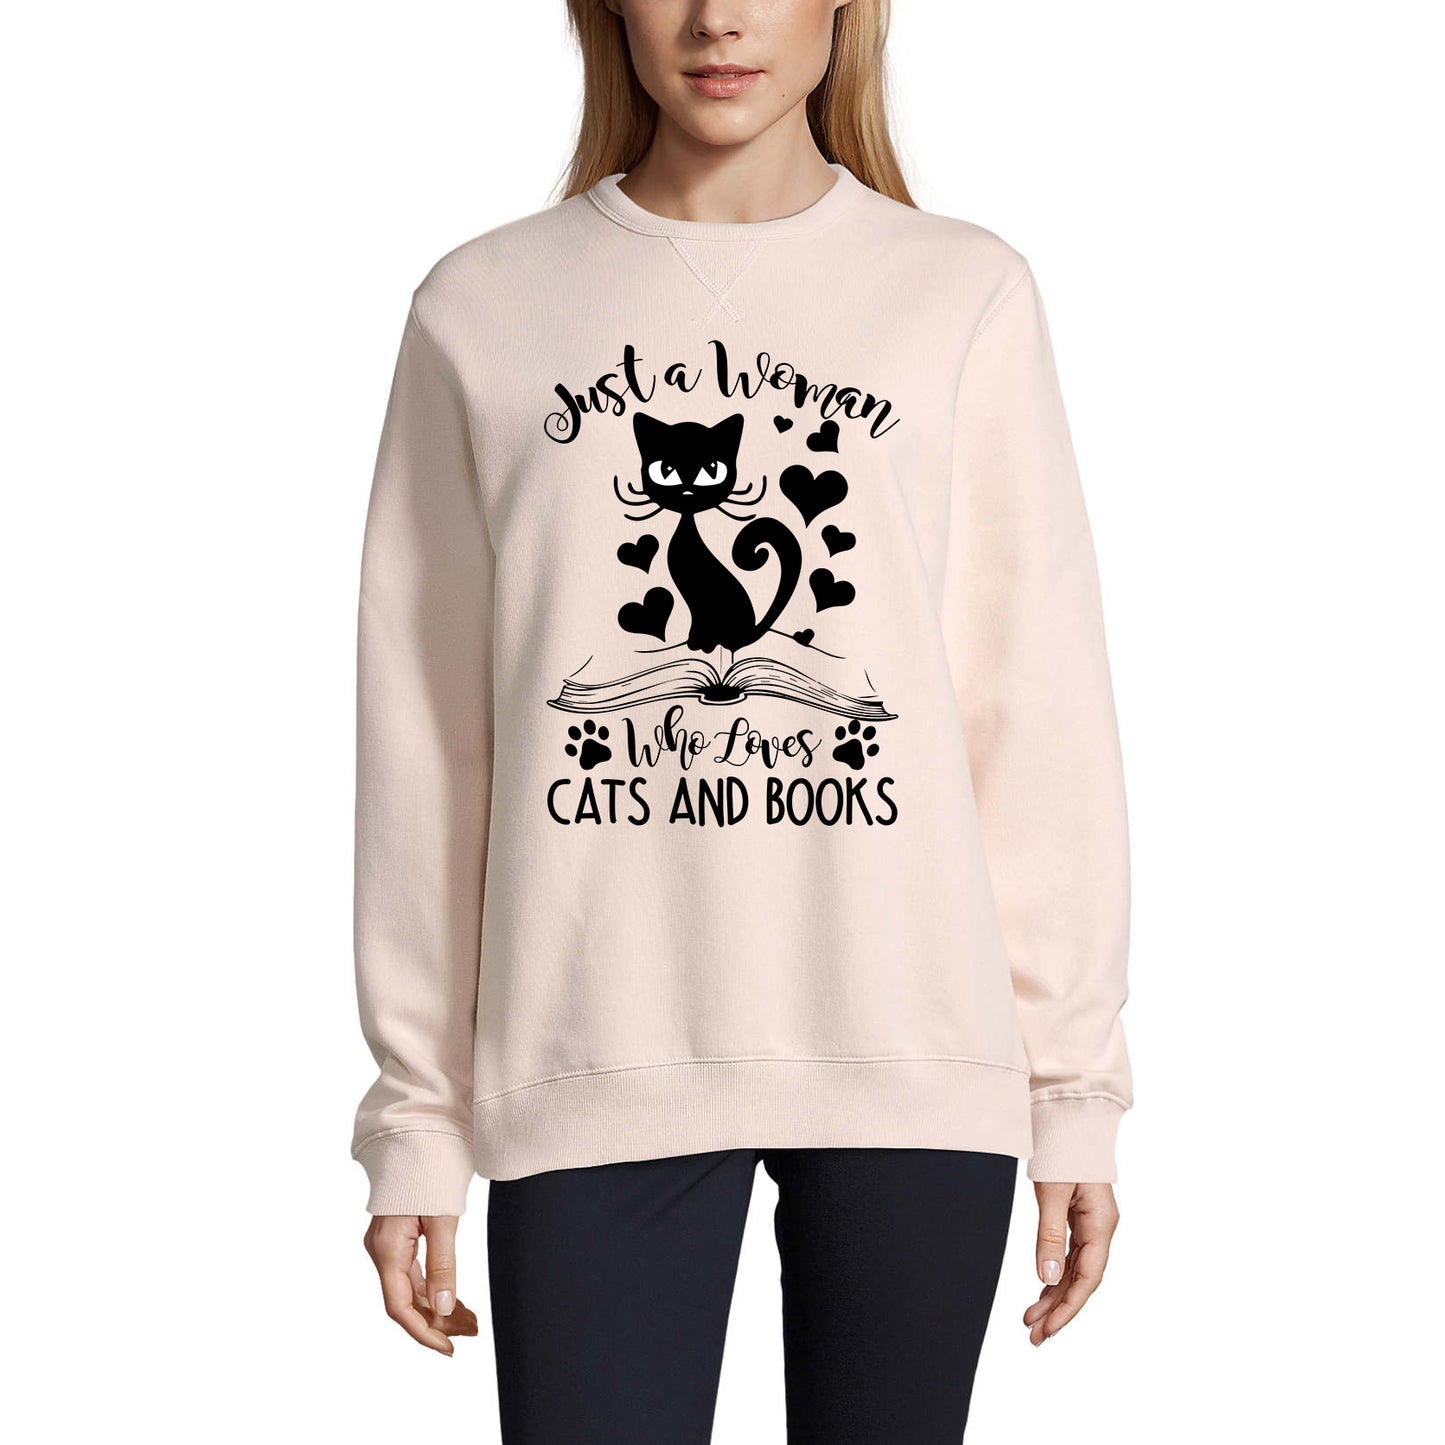 ULTRABASIC Women's Sweatshirt Just a Woman Who Loves Cat And Books - Cute Cat